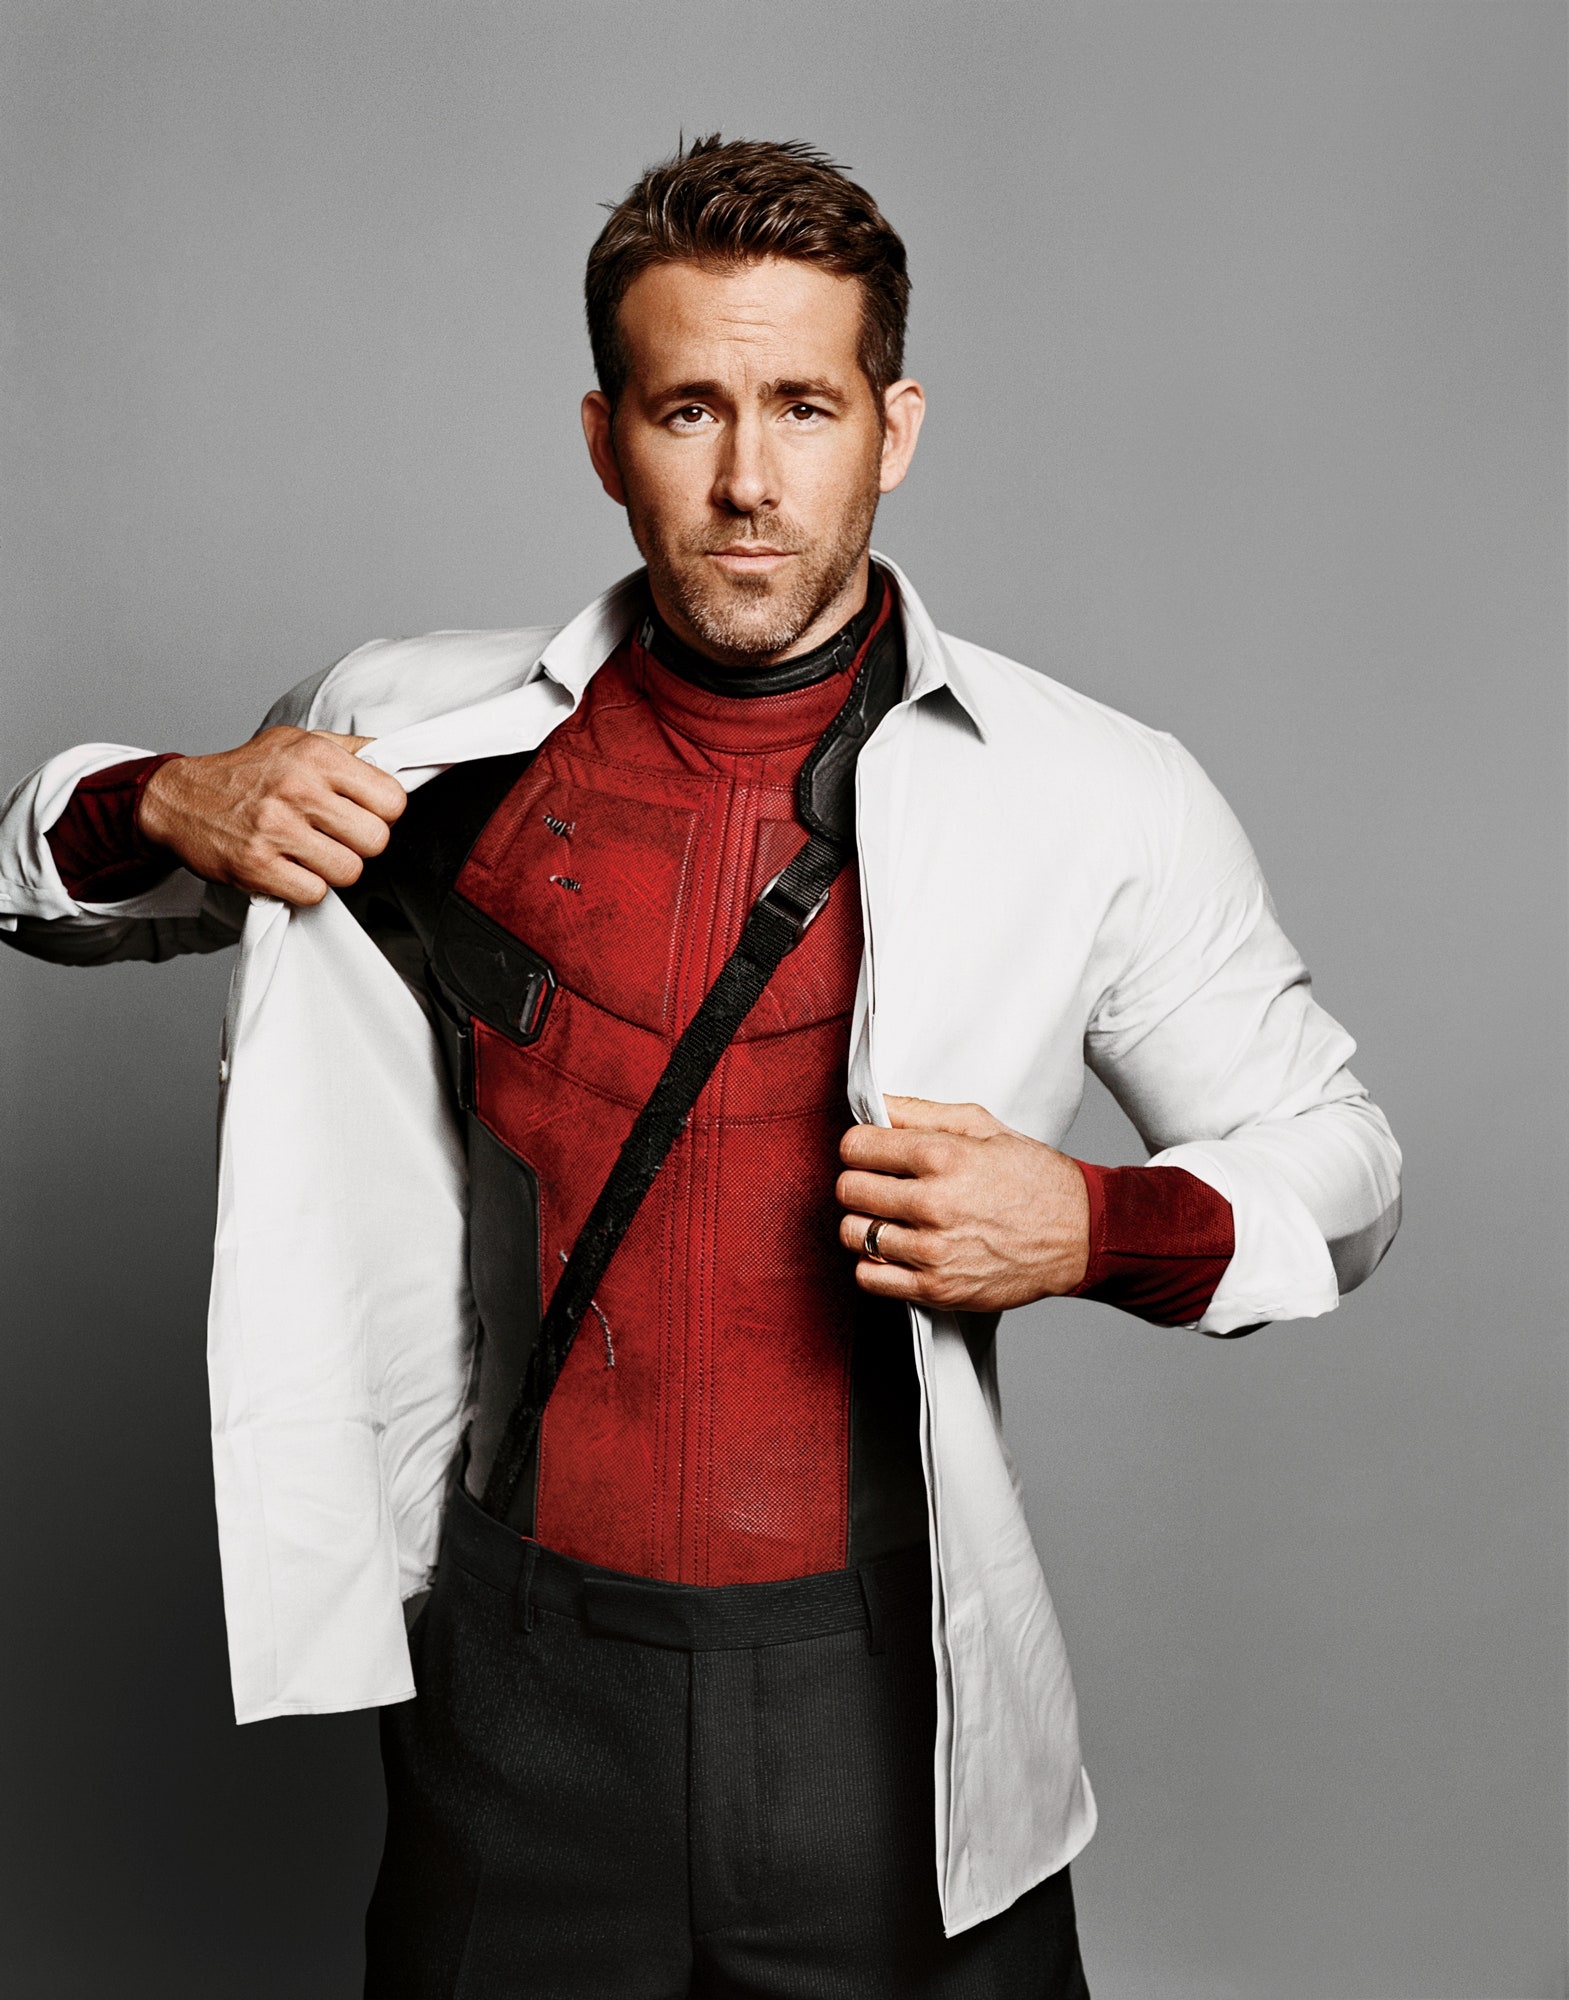 Ryan Reynolds: Had a supporting role as Jay "Boom" DeBoom in the third season of The X-Files. 1570x2000 HD Wallpaper.